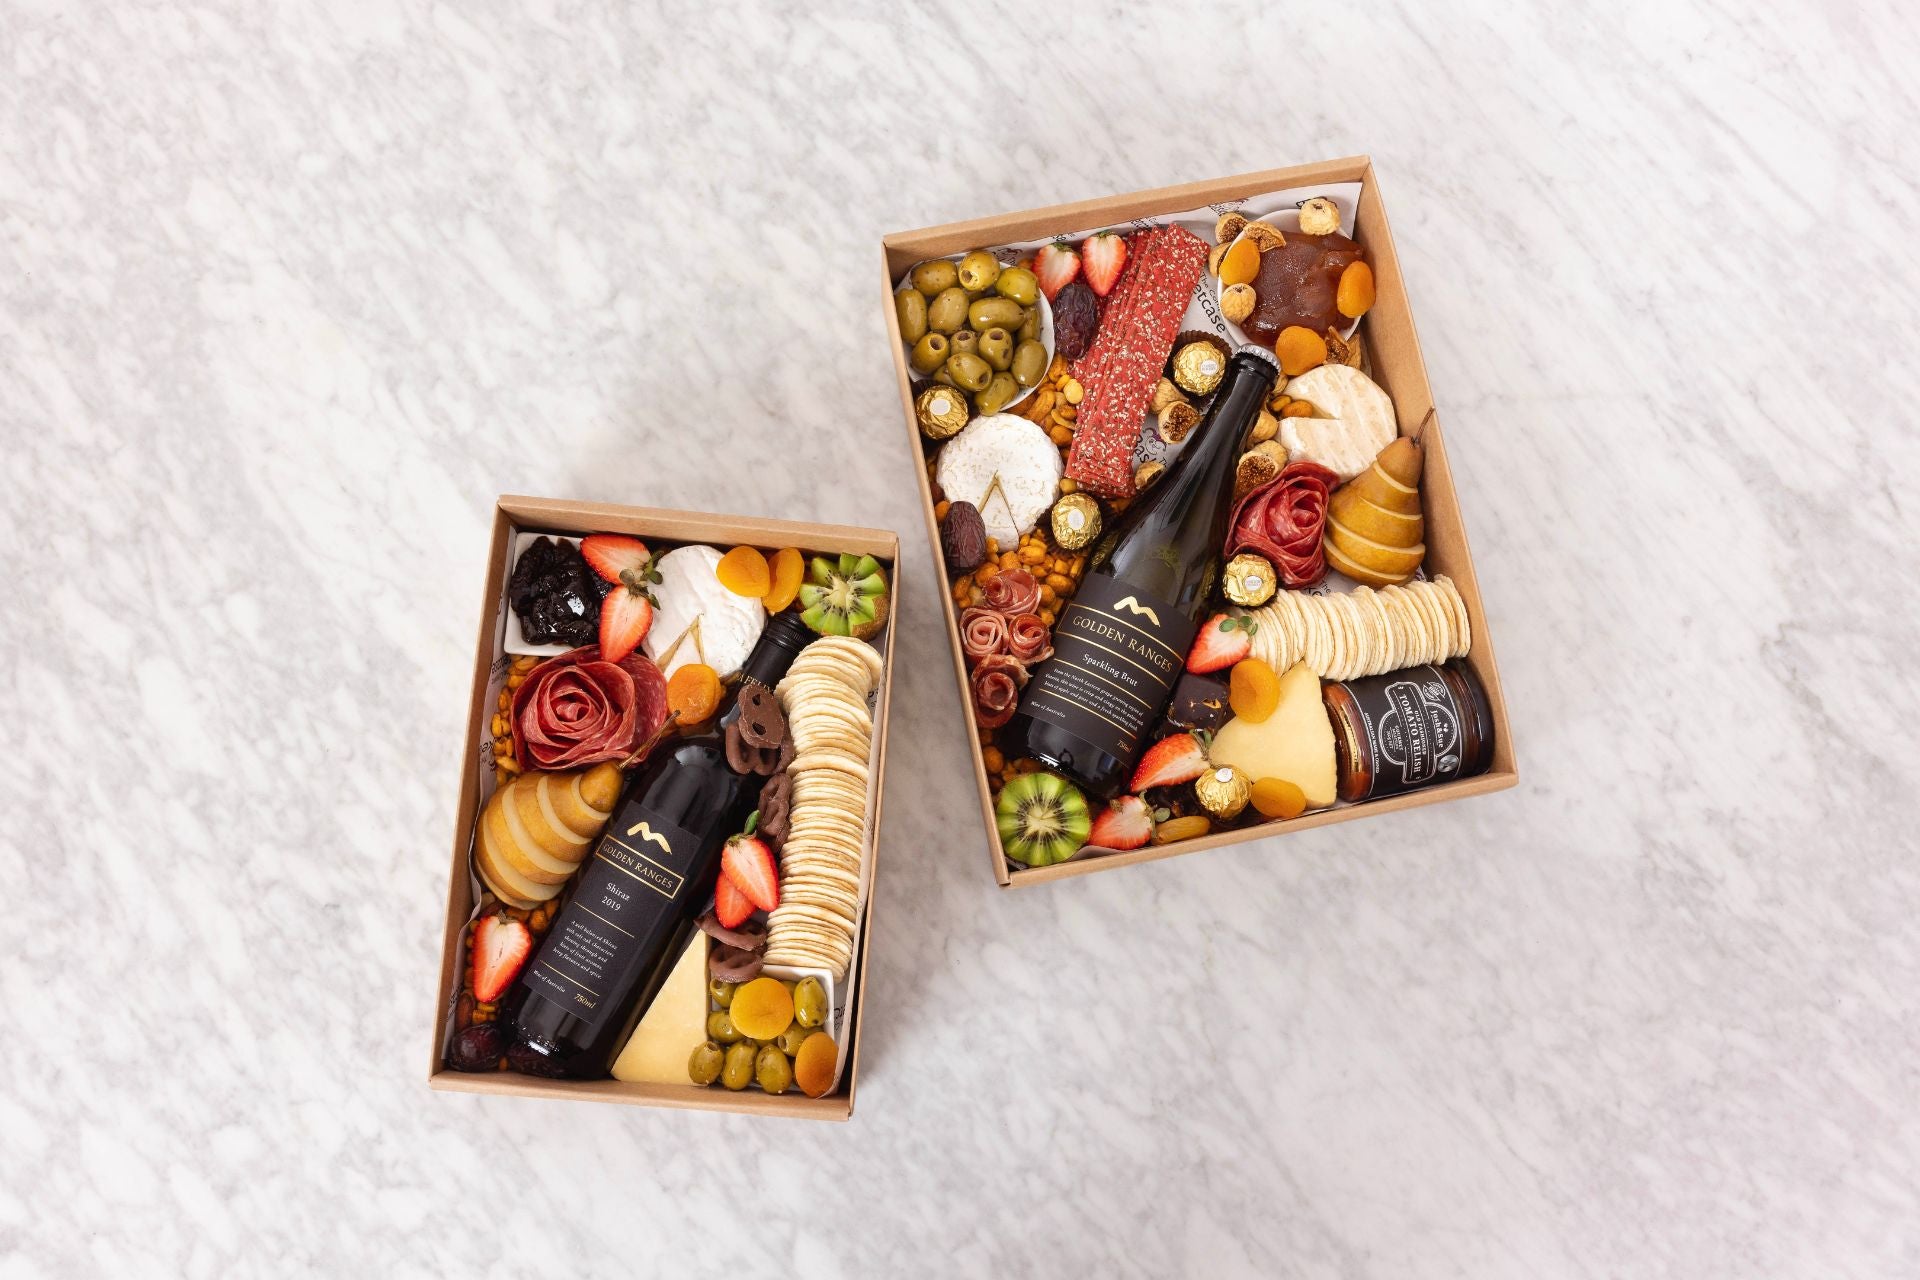 Chocolate, Cheese or Wine for your Anniversary Gift?